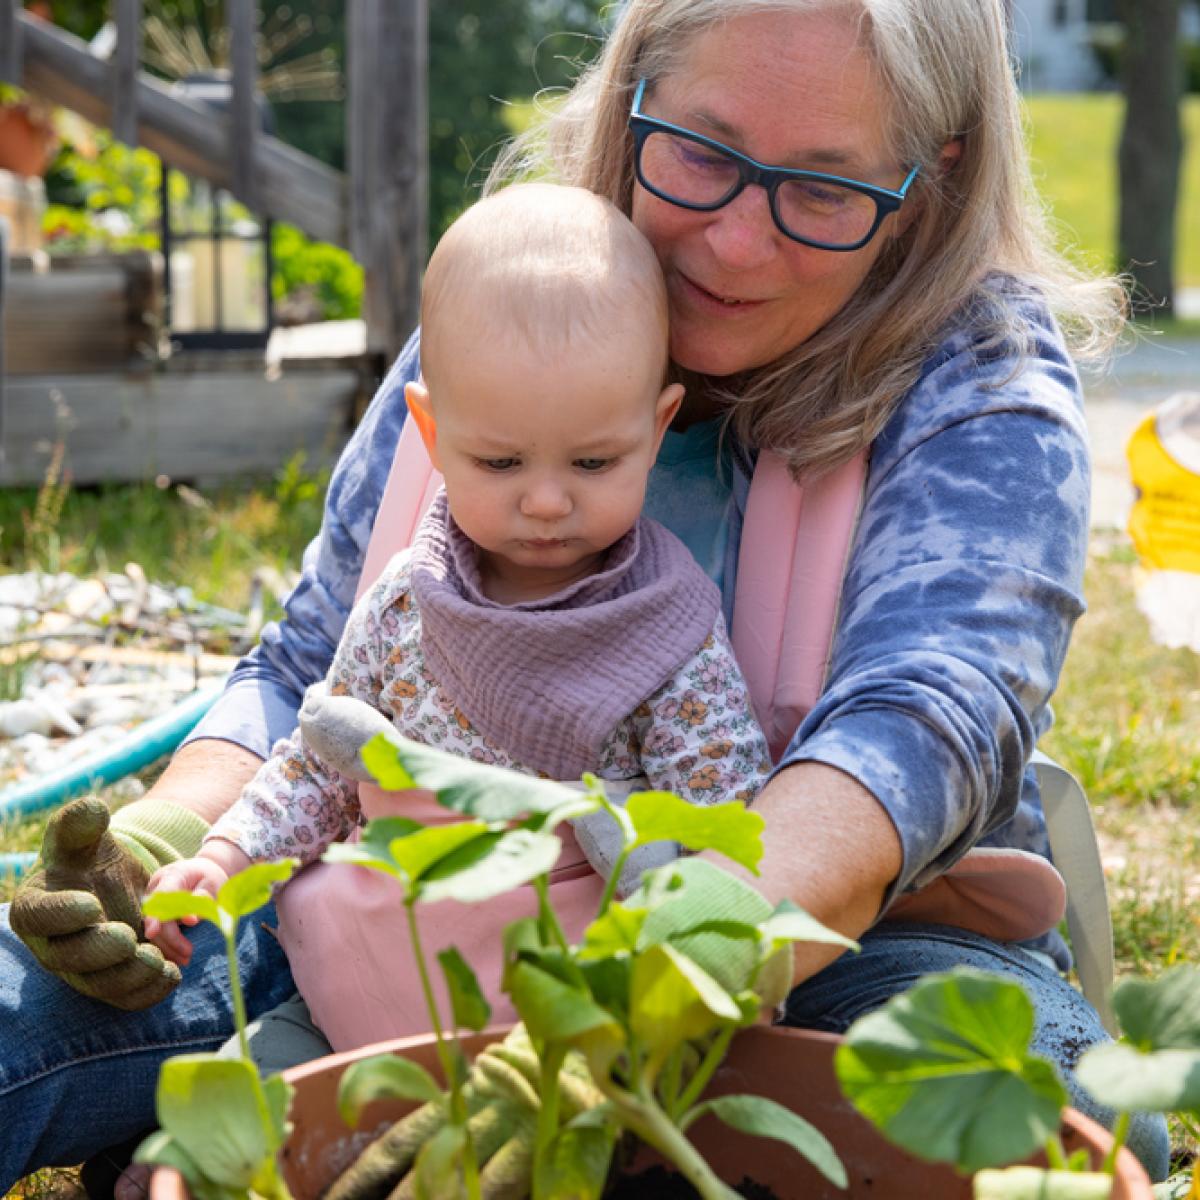 A woman sits with a baby in a carrier attached to her body, they look at a squash plant